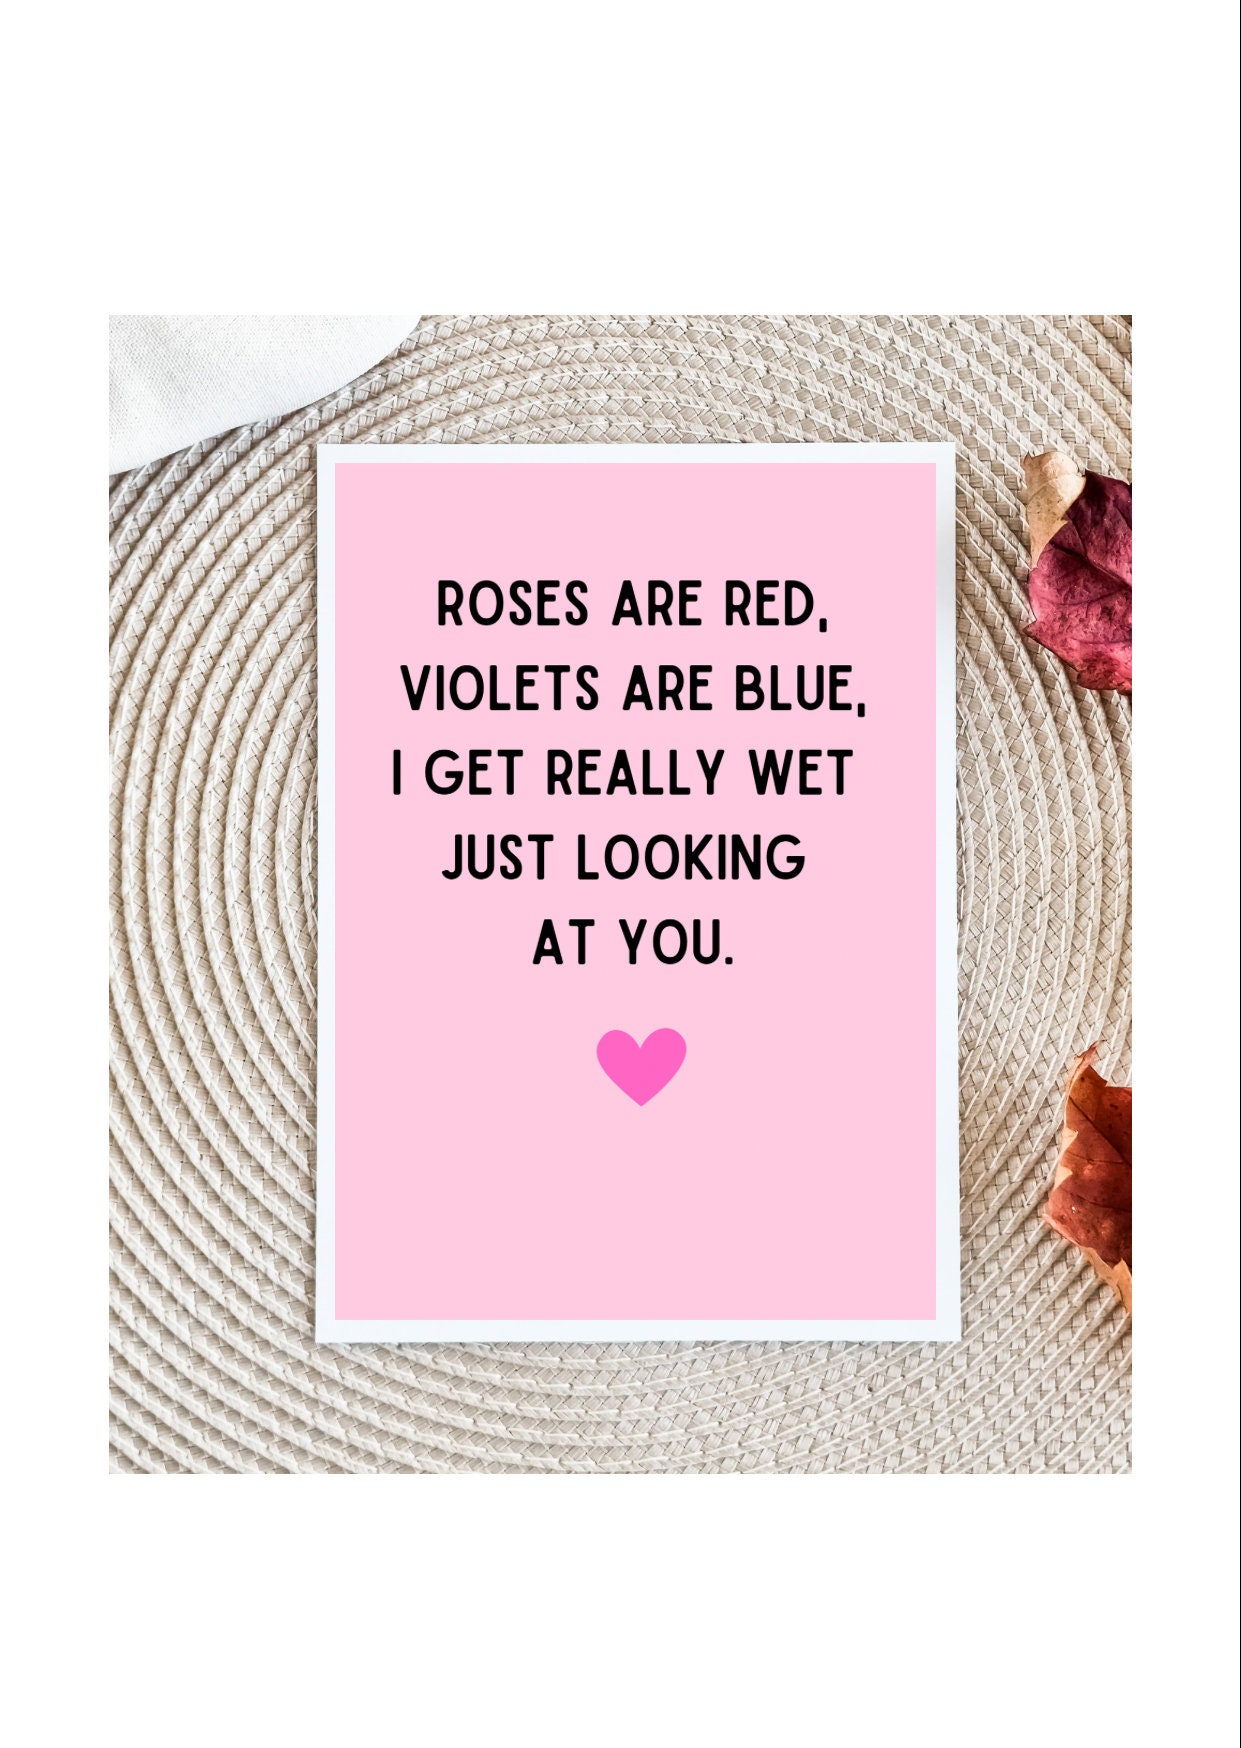  I Will Always LOVE You: Cute Things To Get Your Boyfriend For  Valentines Day, Funny Valentine Gifts For Him Romantic,Valentine's Day Gift  For Husband  Gift, 120 Pages , 6X9, Soft